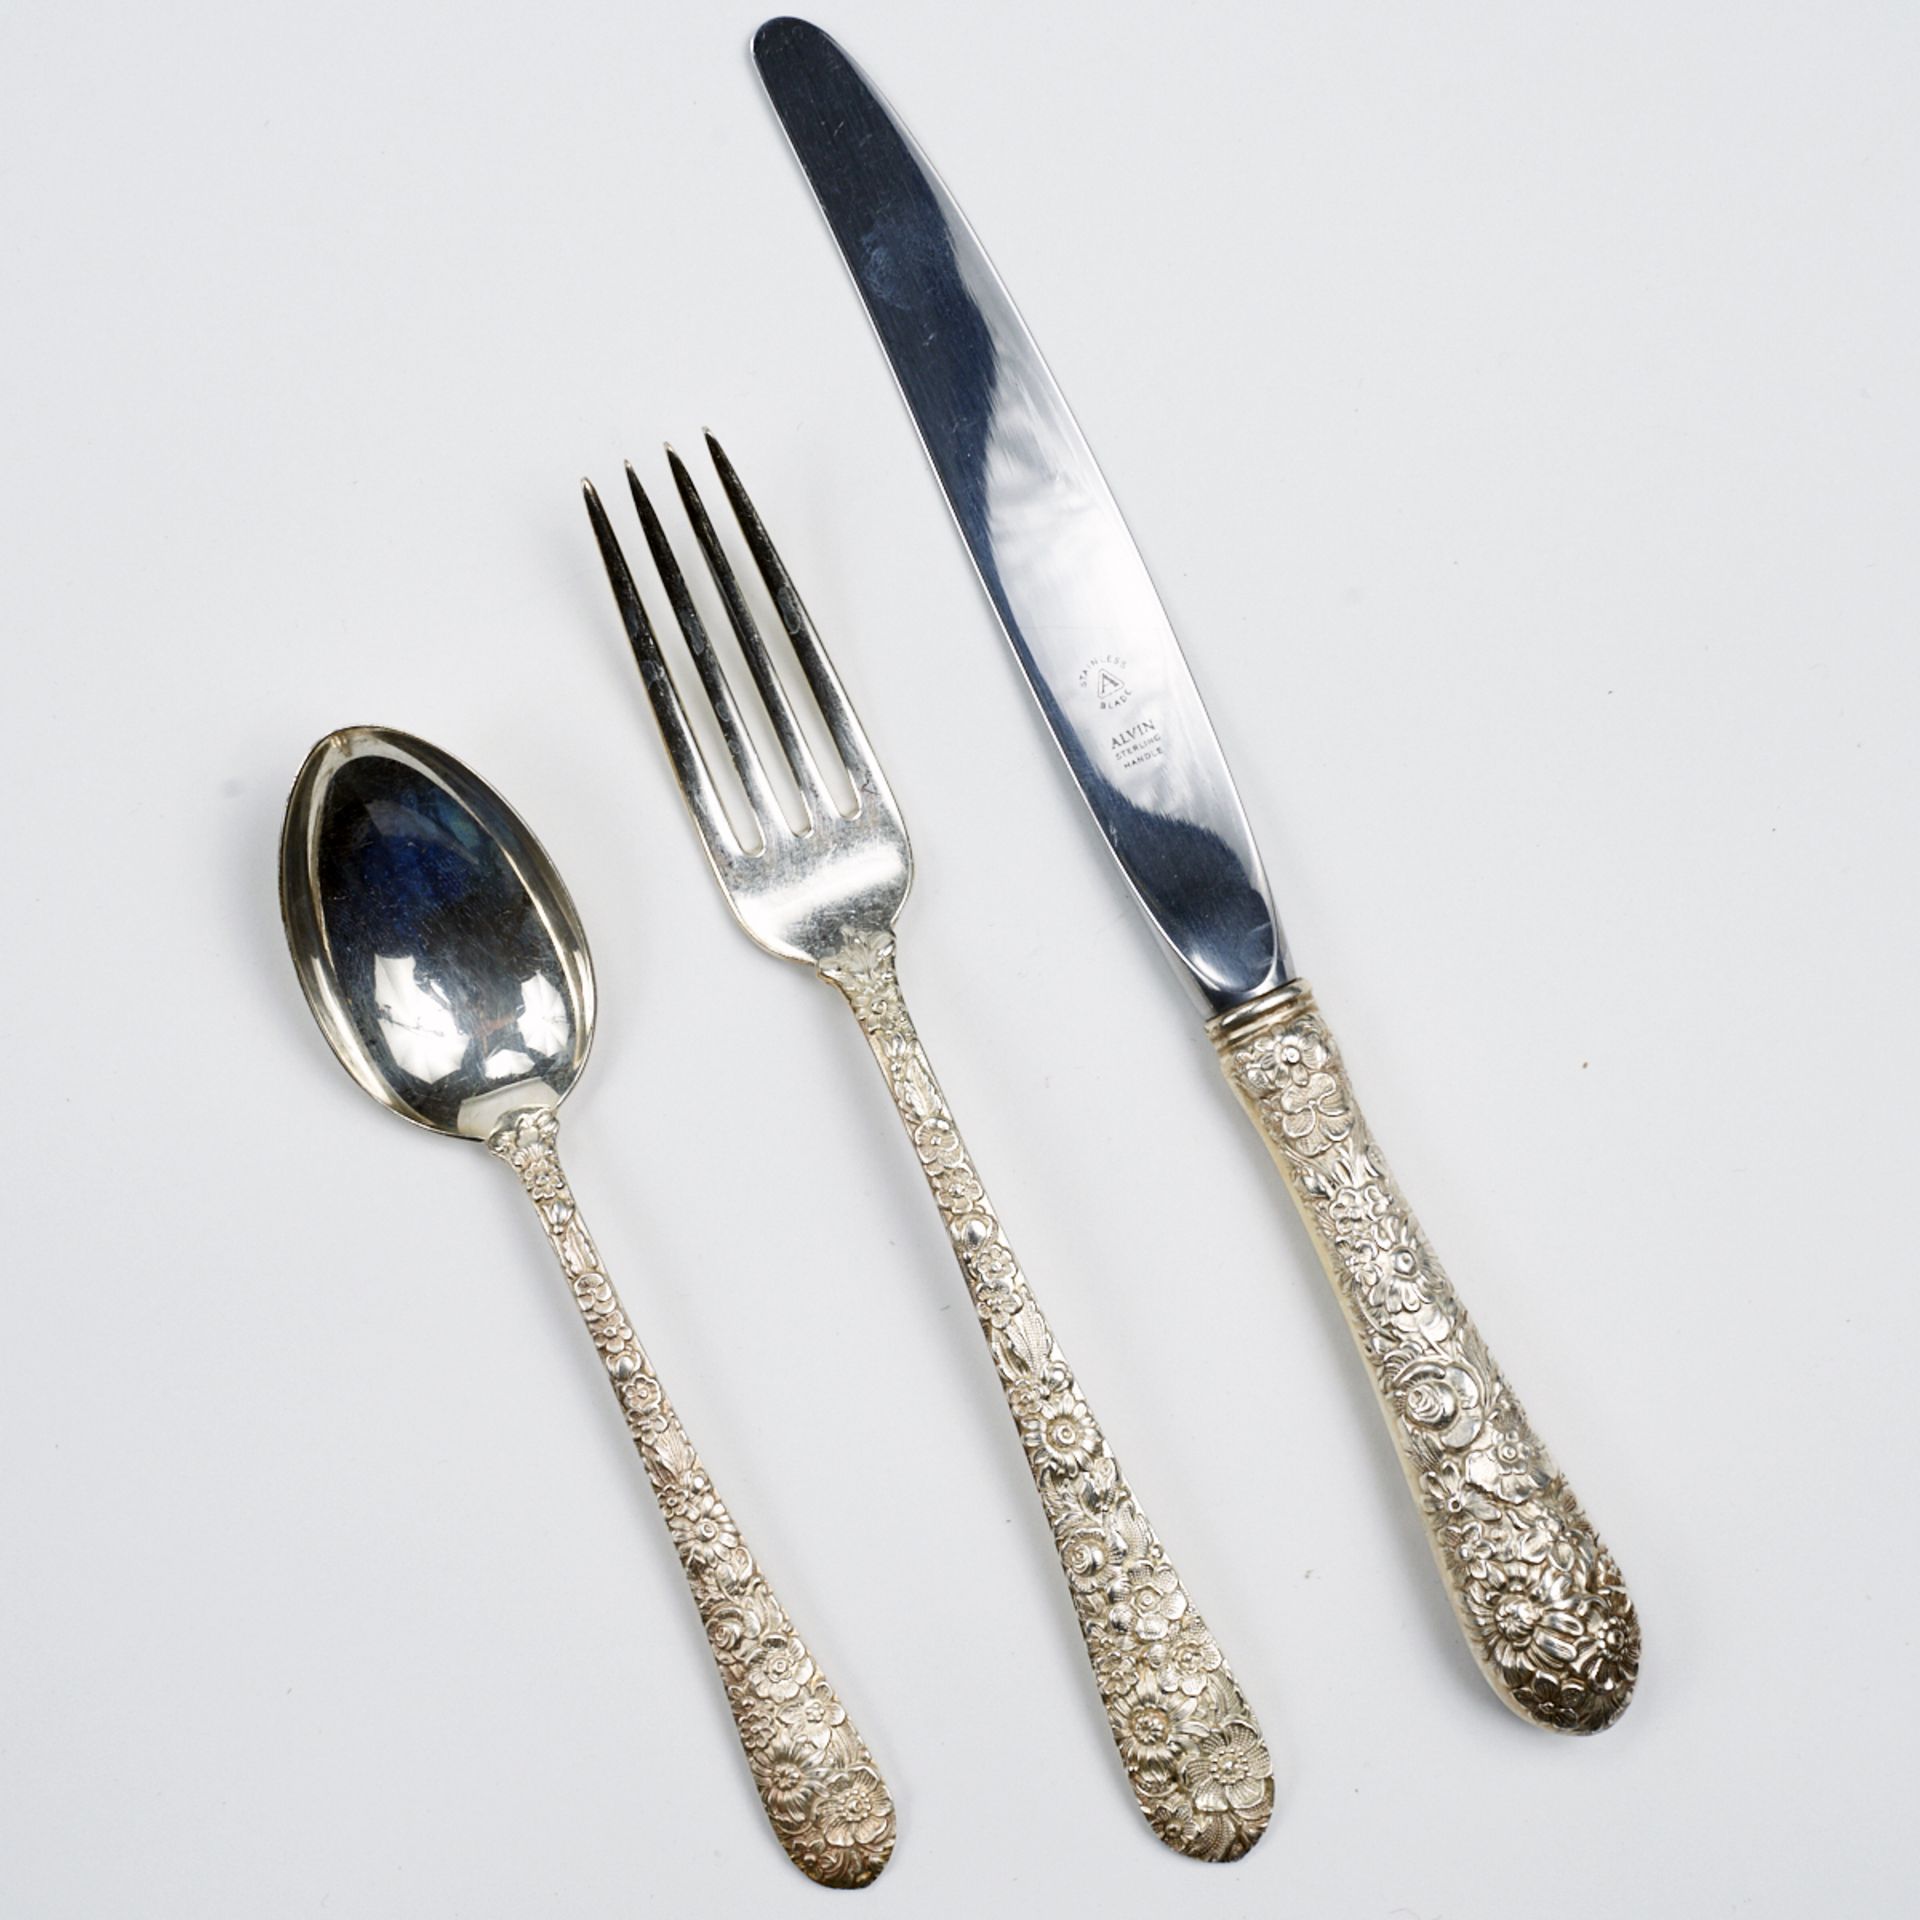 Set of Alvin Repousse Sterling Silver Flatware - Image 3 of 7